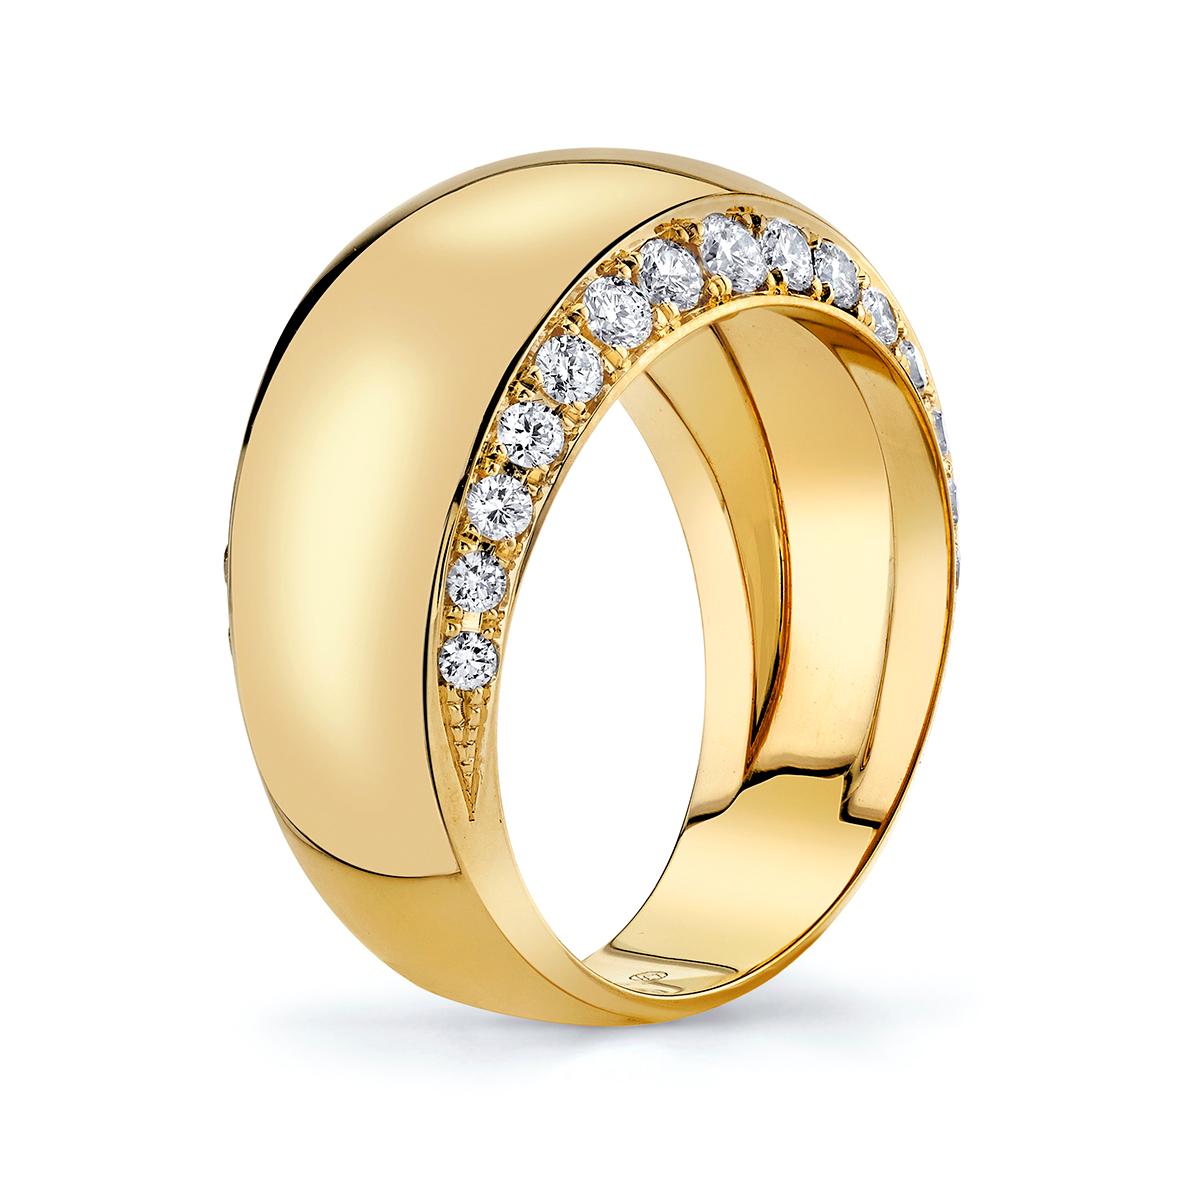 This Ring is 18 Karat Solid Yellow Gold Ring and is made by hand in Los Angeles, CA. This Ring has 0.8 Carats White Diamonds along 2 edges of the ring.
The ring depth is 12mm. 
This Ring is a size 7. 

One side of the halo is a reflection of the